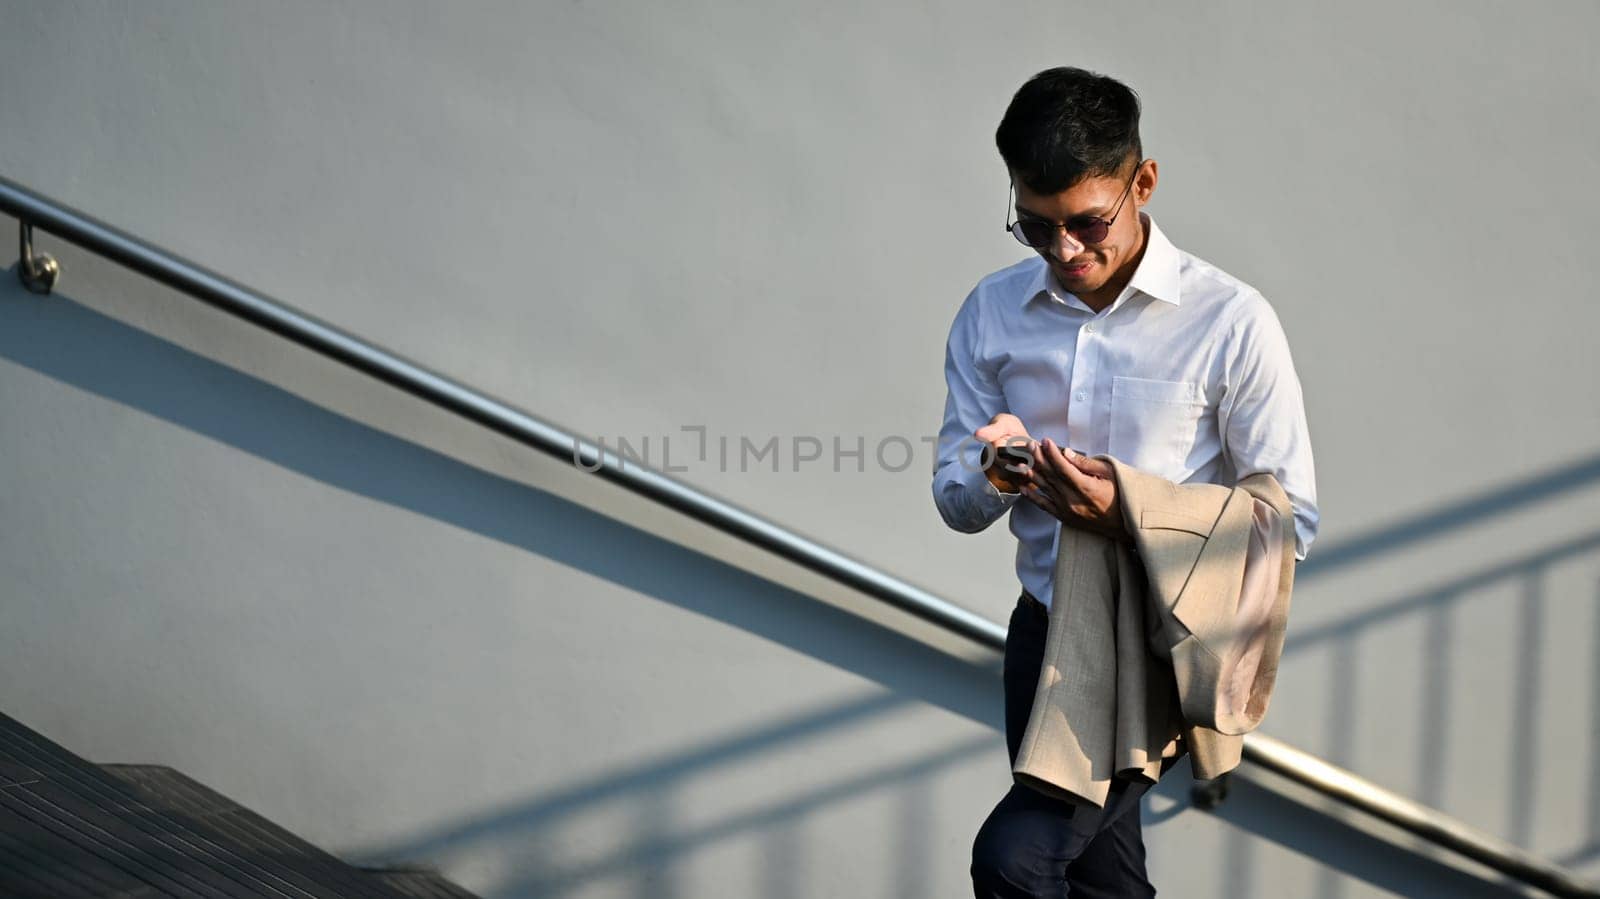 Millennial businessman using smartphone while sitting outside office building. Modern lifestyle and technology concept by prathanchorruangsak